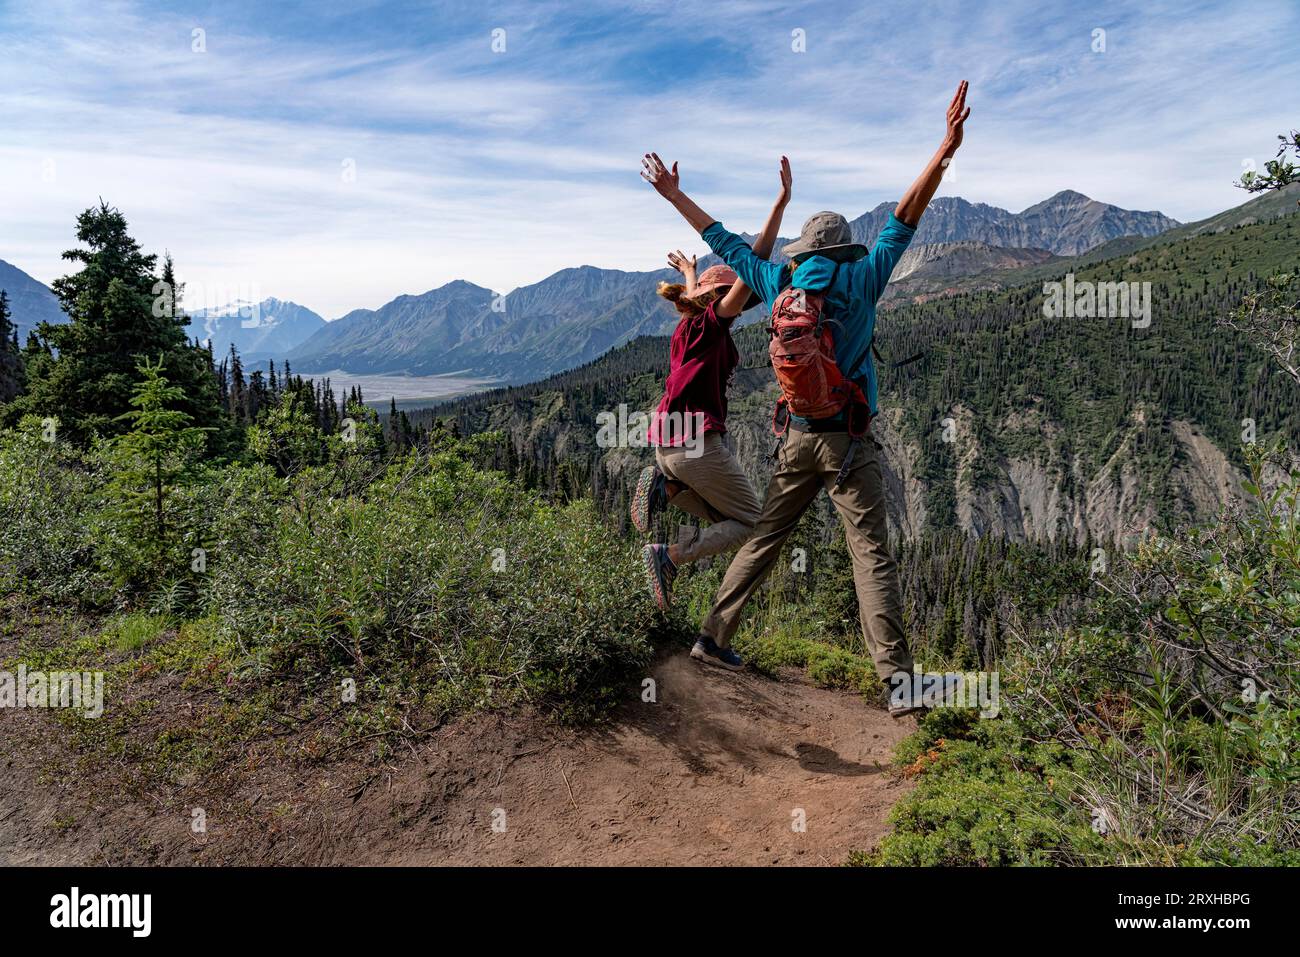 Two people on a mountaintop jumping up with their hands raised and having a good time during a hike in the Yukon wilderness; Yukon, Canada Stock Photo